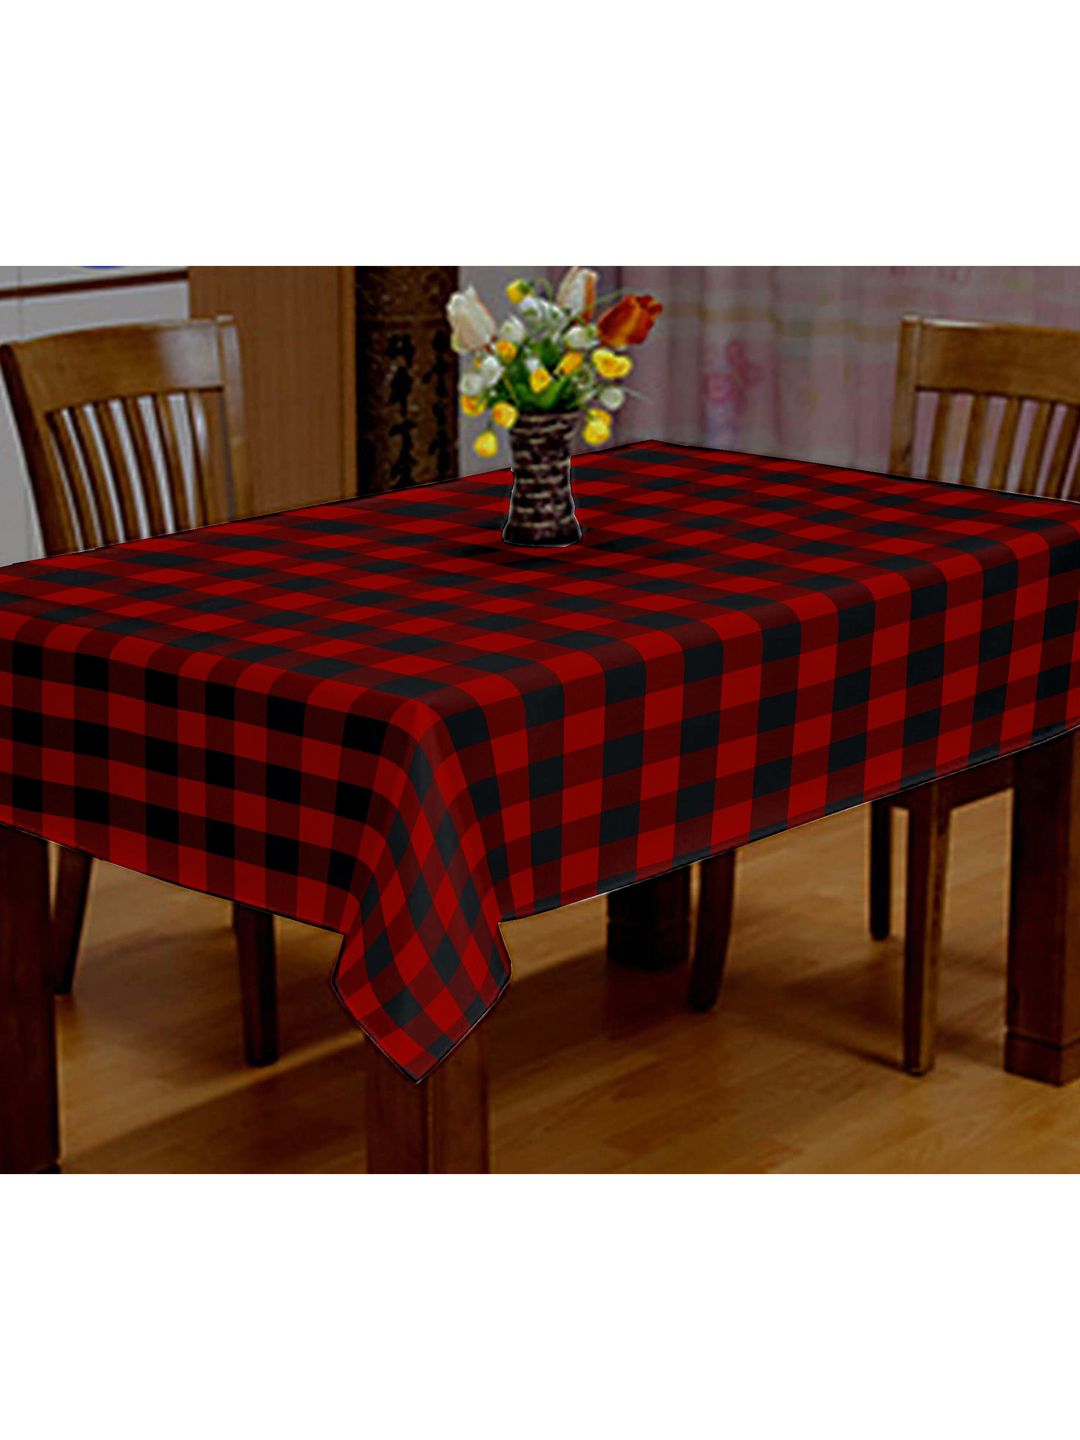 Lushomes Red & Black Checked Rectangle 4 Seater Table Cover Price in India